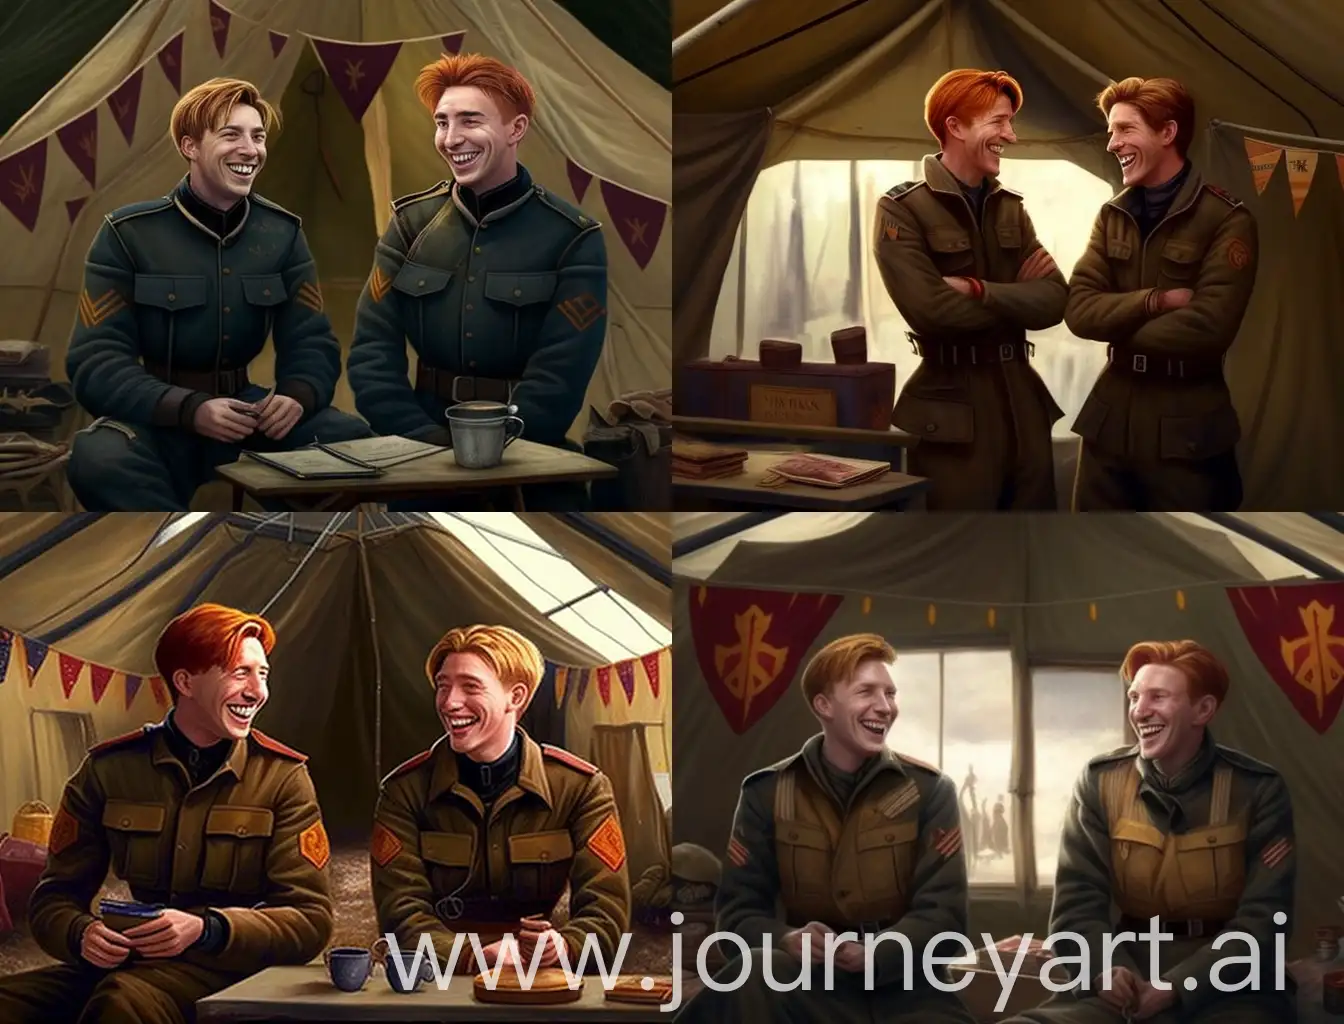 Fred and George Weasley are in British military uniform and laughing at different things. they are using their sense of humor and want to have fun and attract others to their Shop items. a military tent is their background,This camp is in an open environment outside,There is a Gryffindor mark on their clothes,real